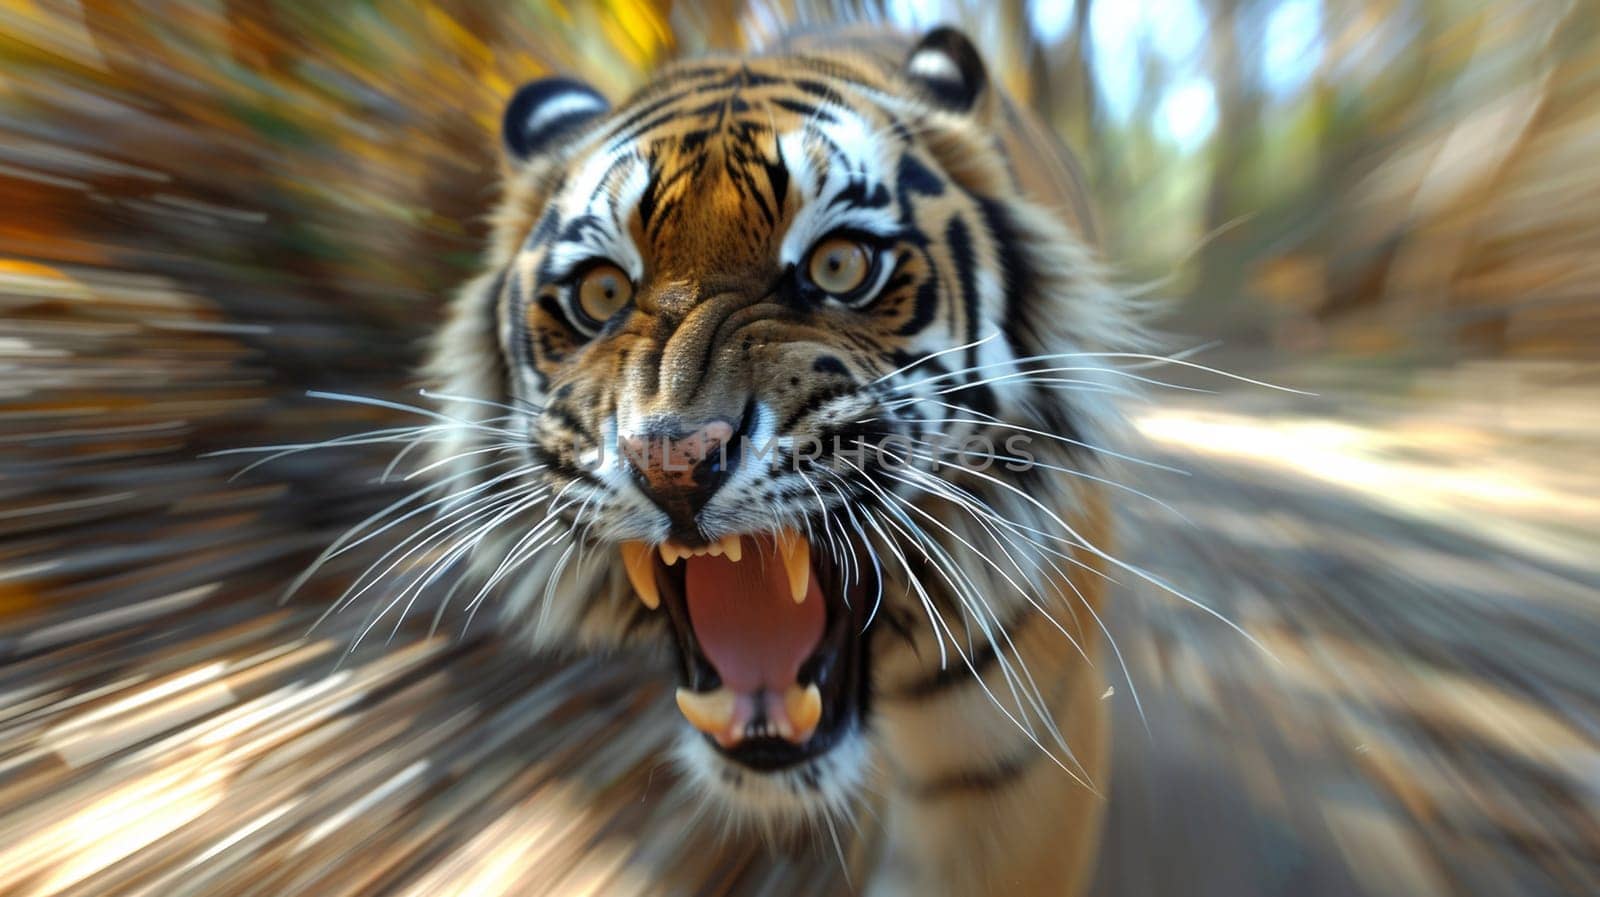 A tiger is roaring and his mouth looks like it's open